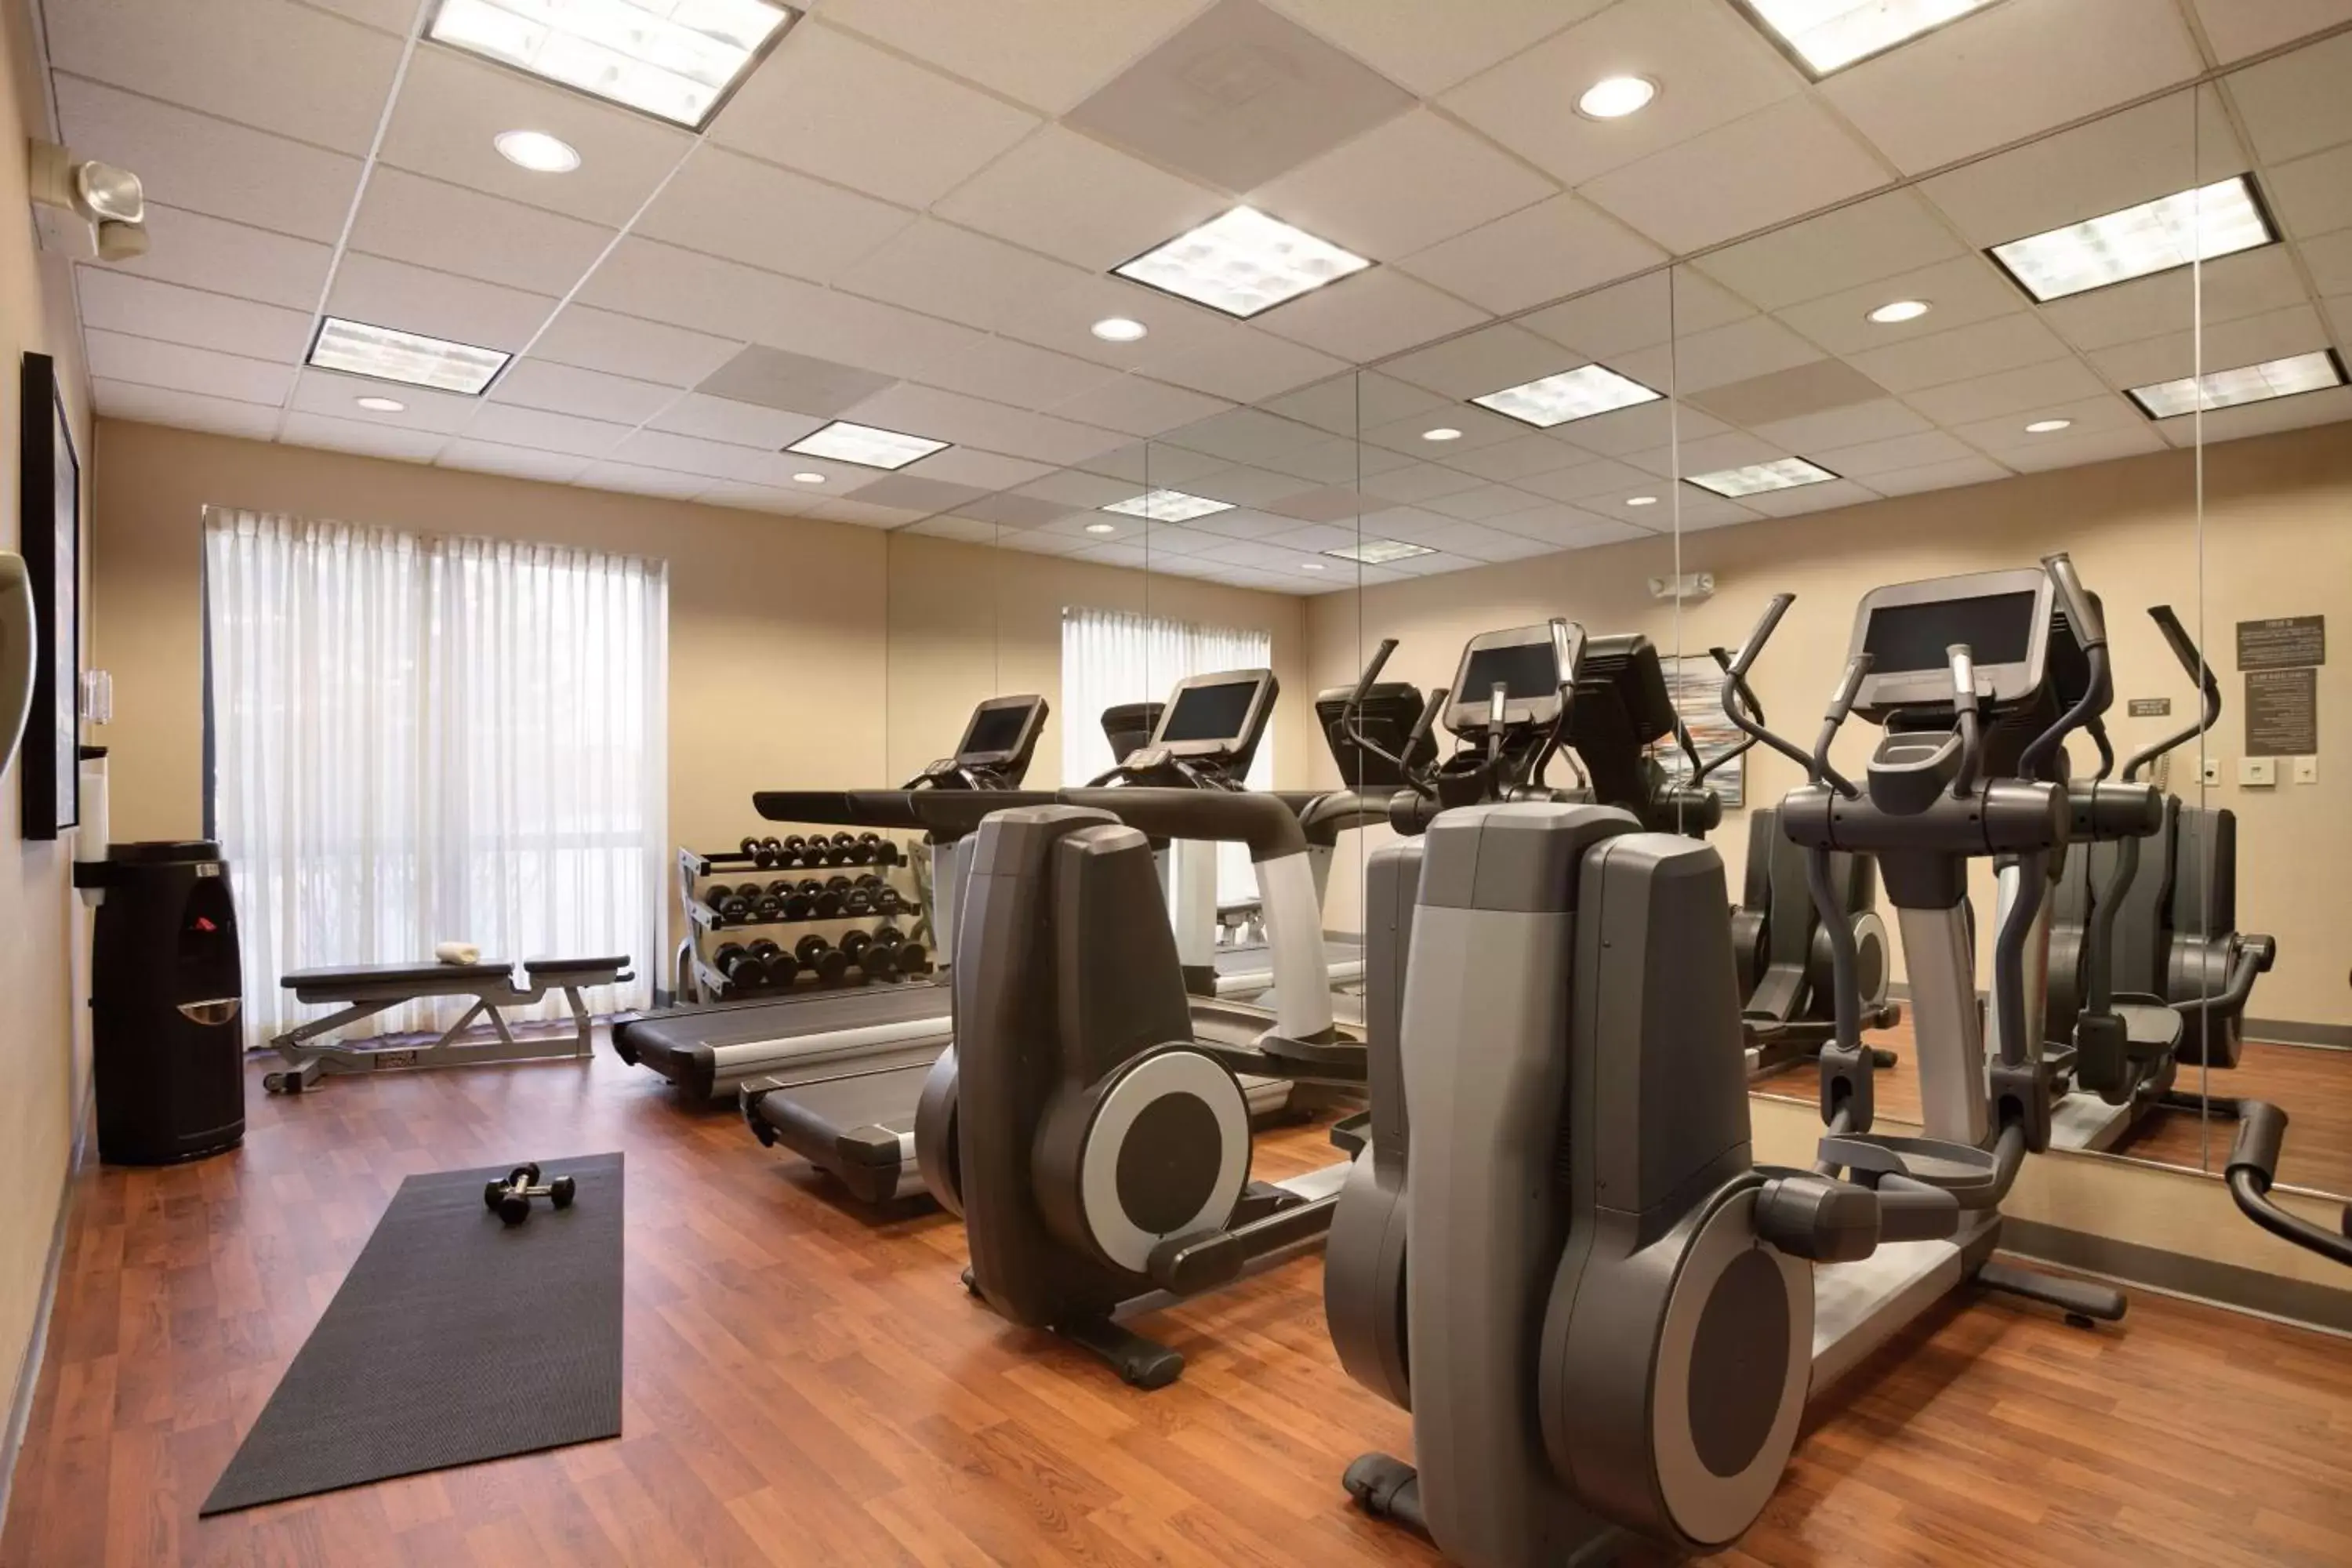 Fitness centre/facilities, Fitness Center/Facilities in Hyatt Place Melbourne/Palm Bay